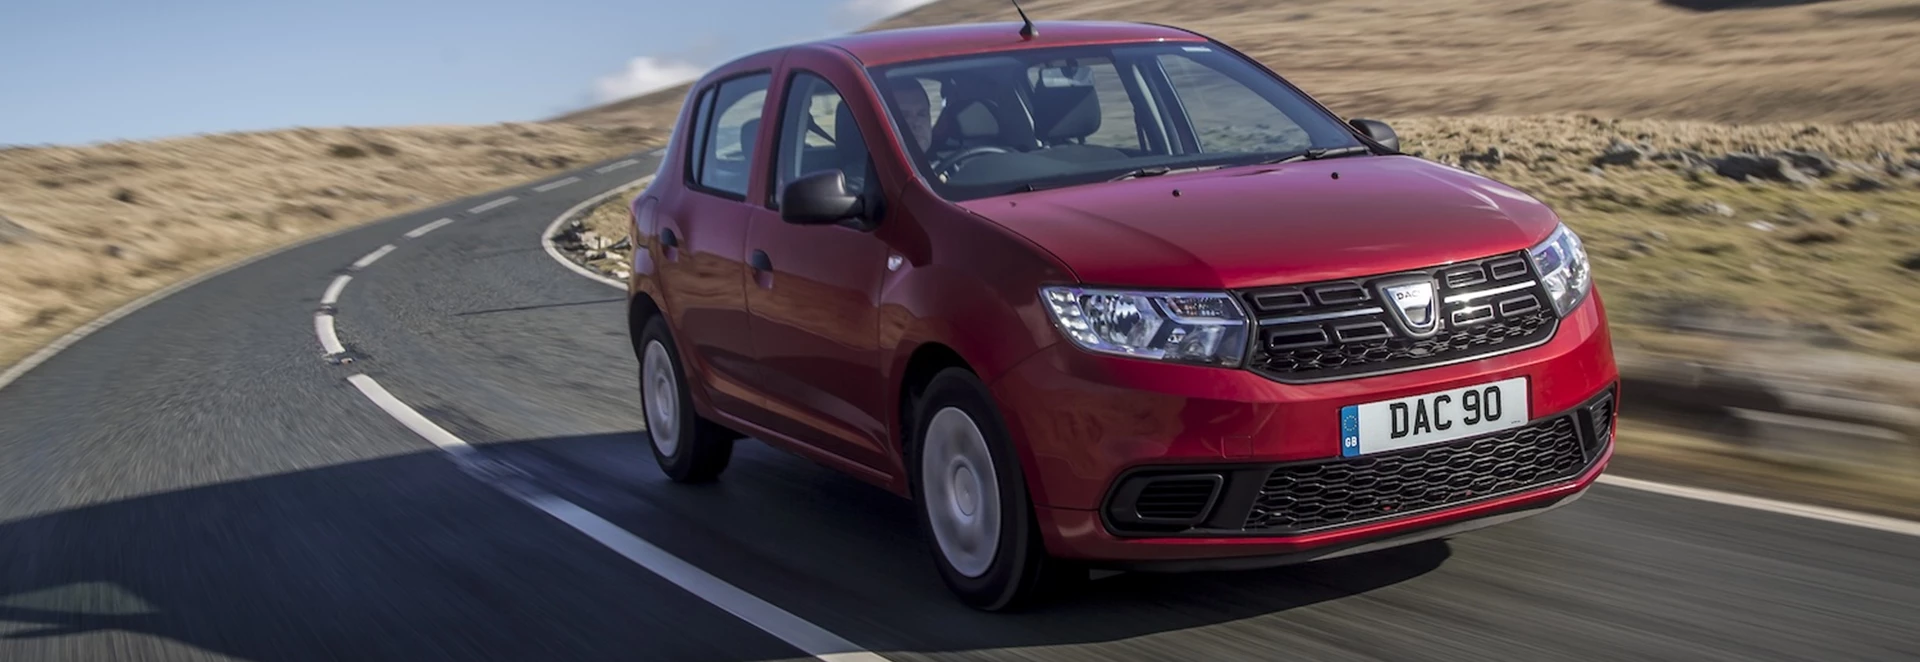 Dacia to launch the cheapest ever EV range - Here's what we know